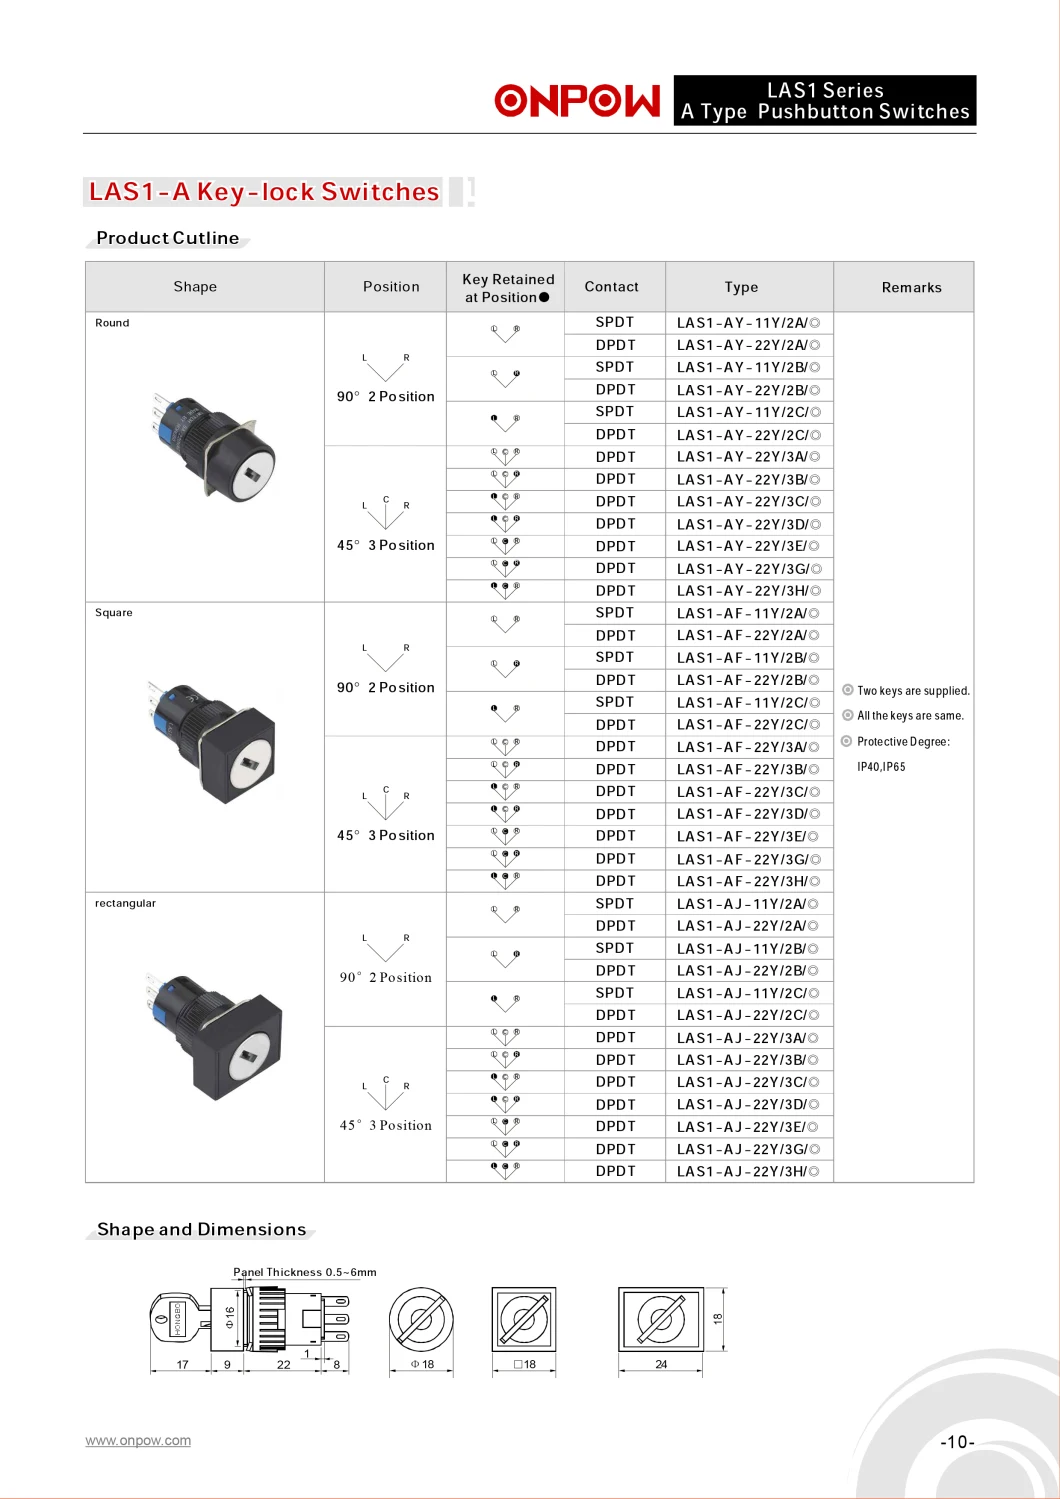 Onpow 16mm Illuminated Momentary Square Push Button Switch (LAS1-ADF-11/G/12V) (Dia. 16mm) (CE, CCC, RoHS, REECH)